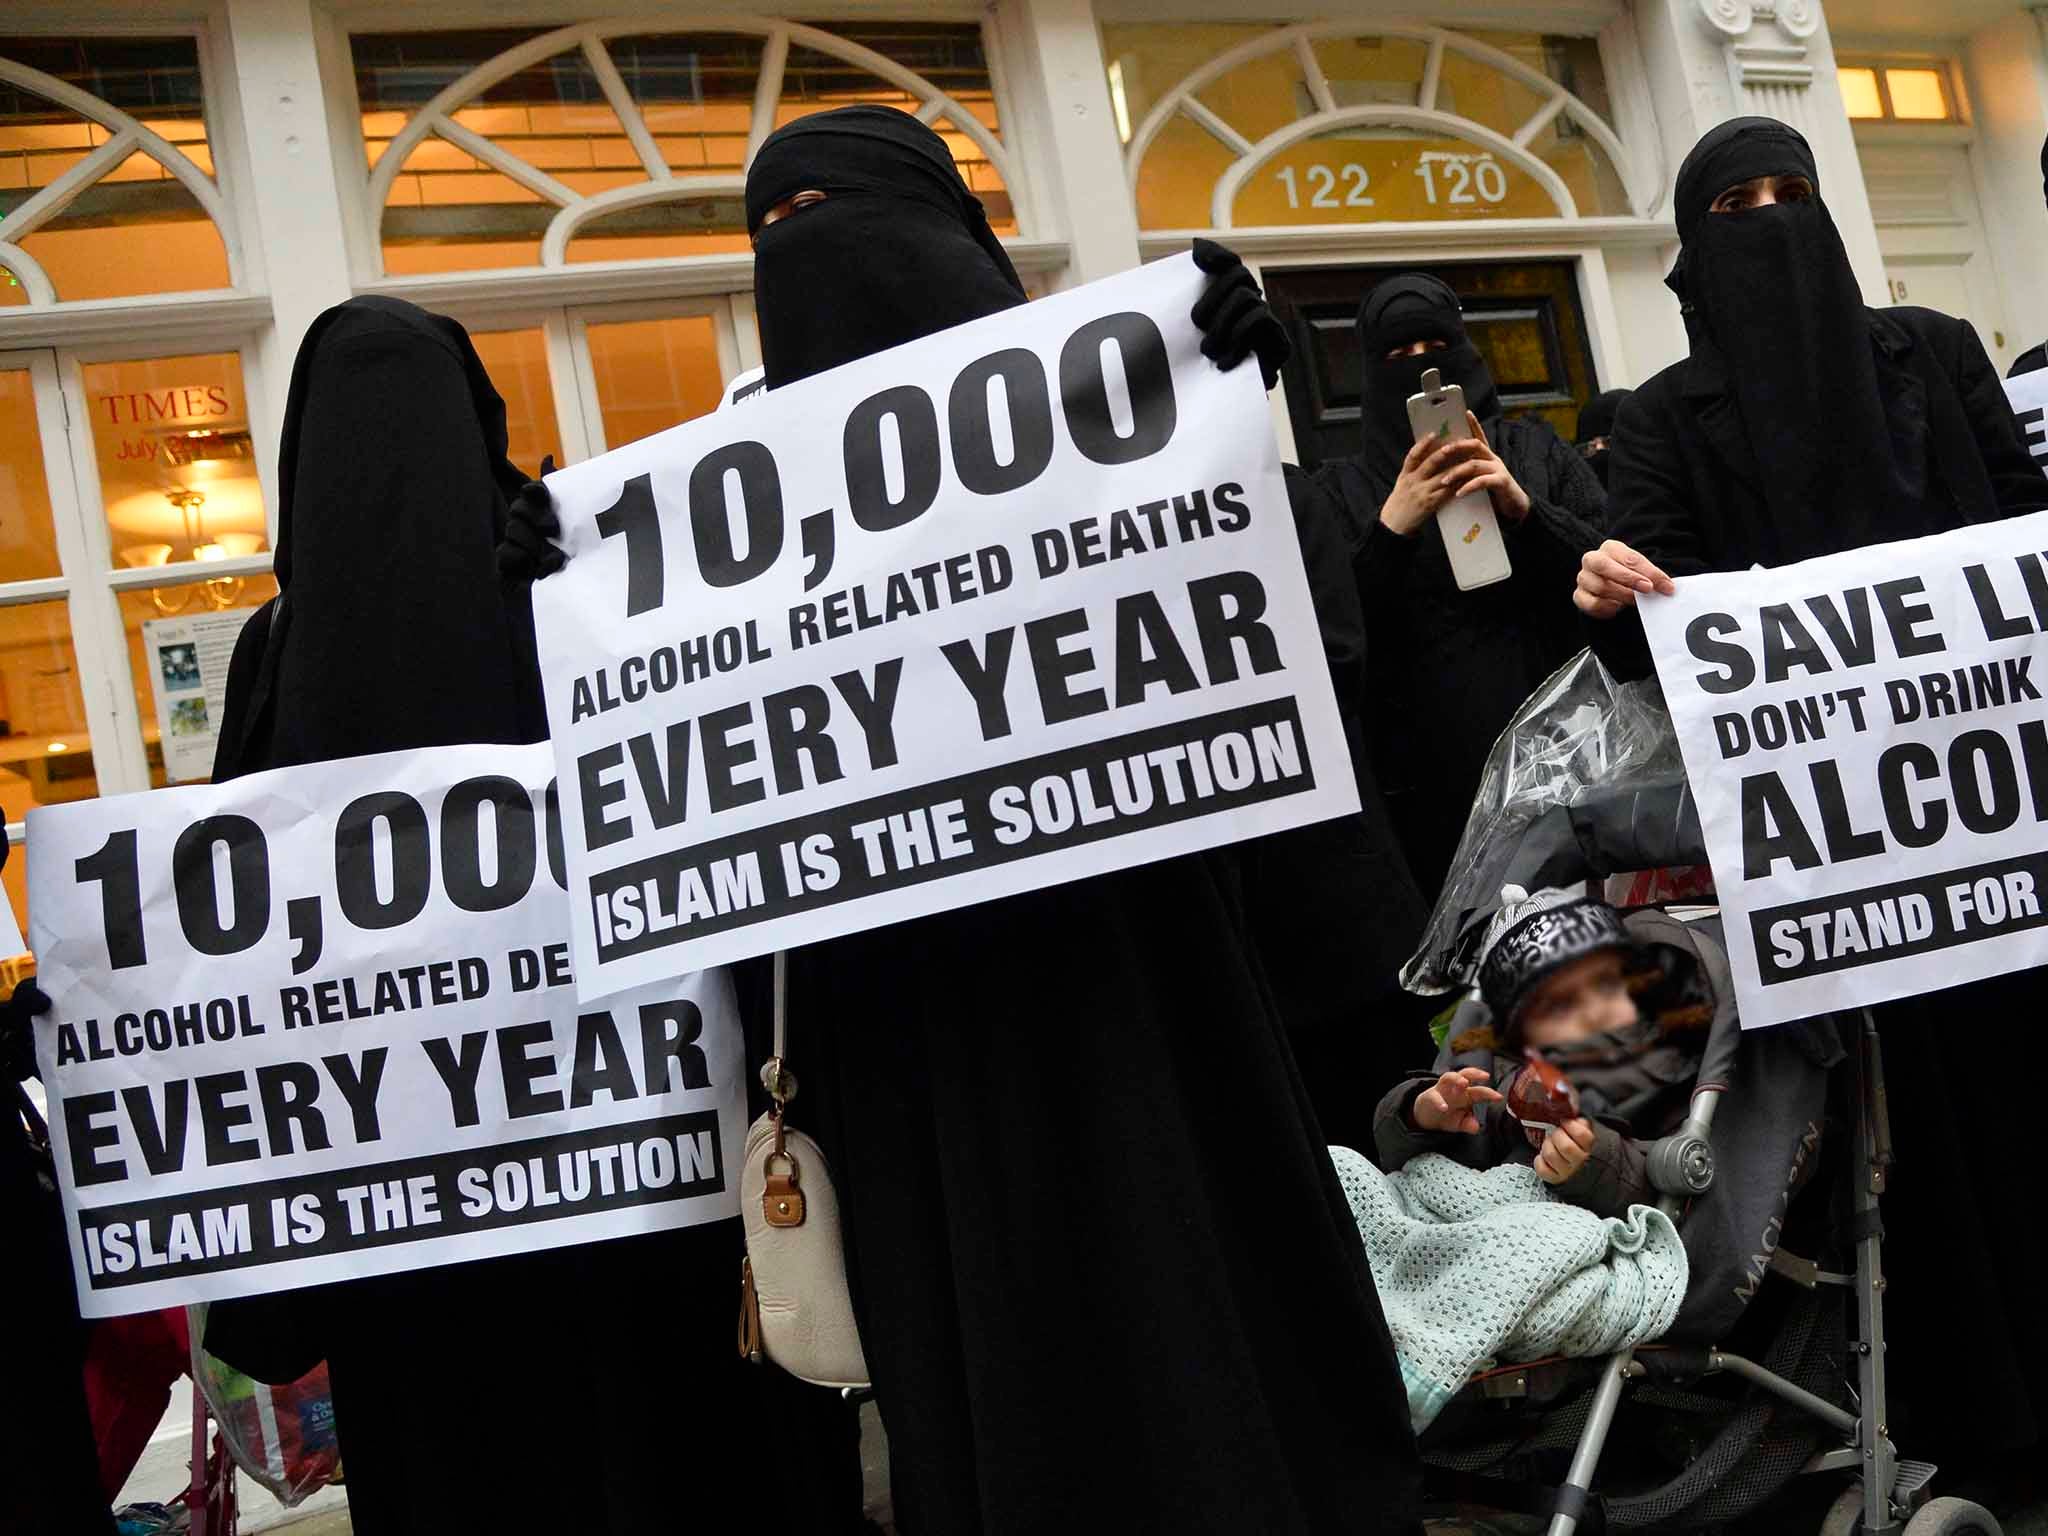 Muslim women take part in a pro-Sharia law protest in London